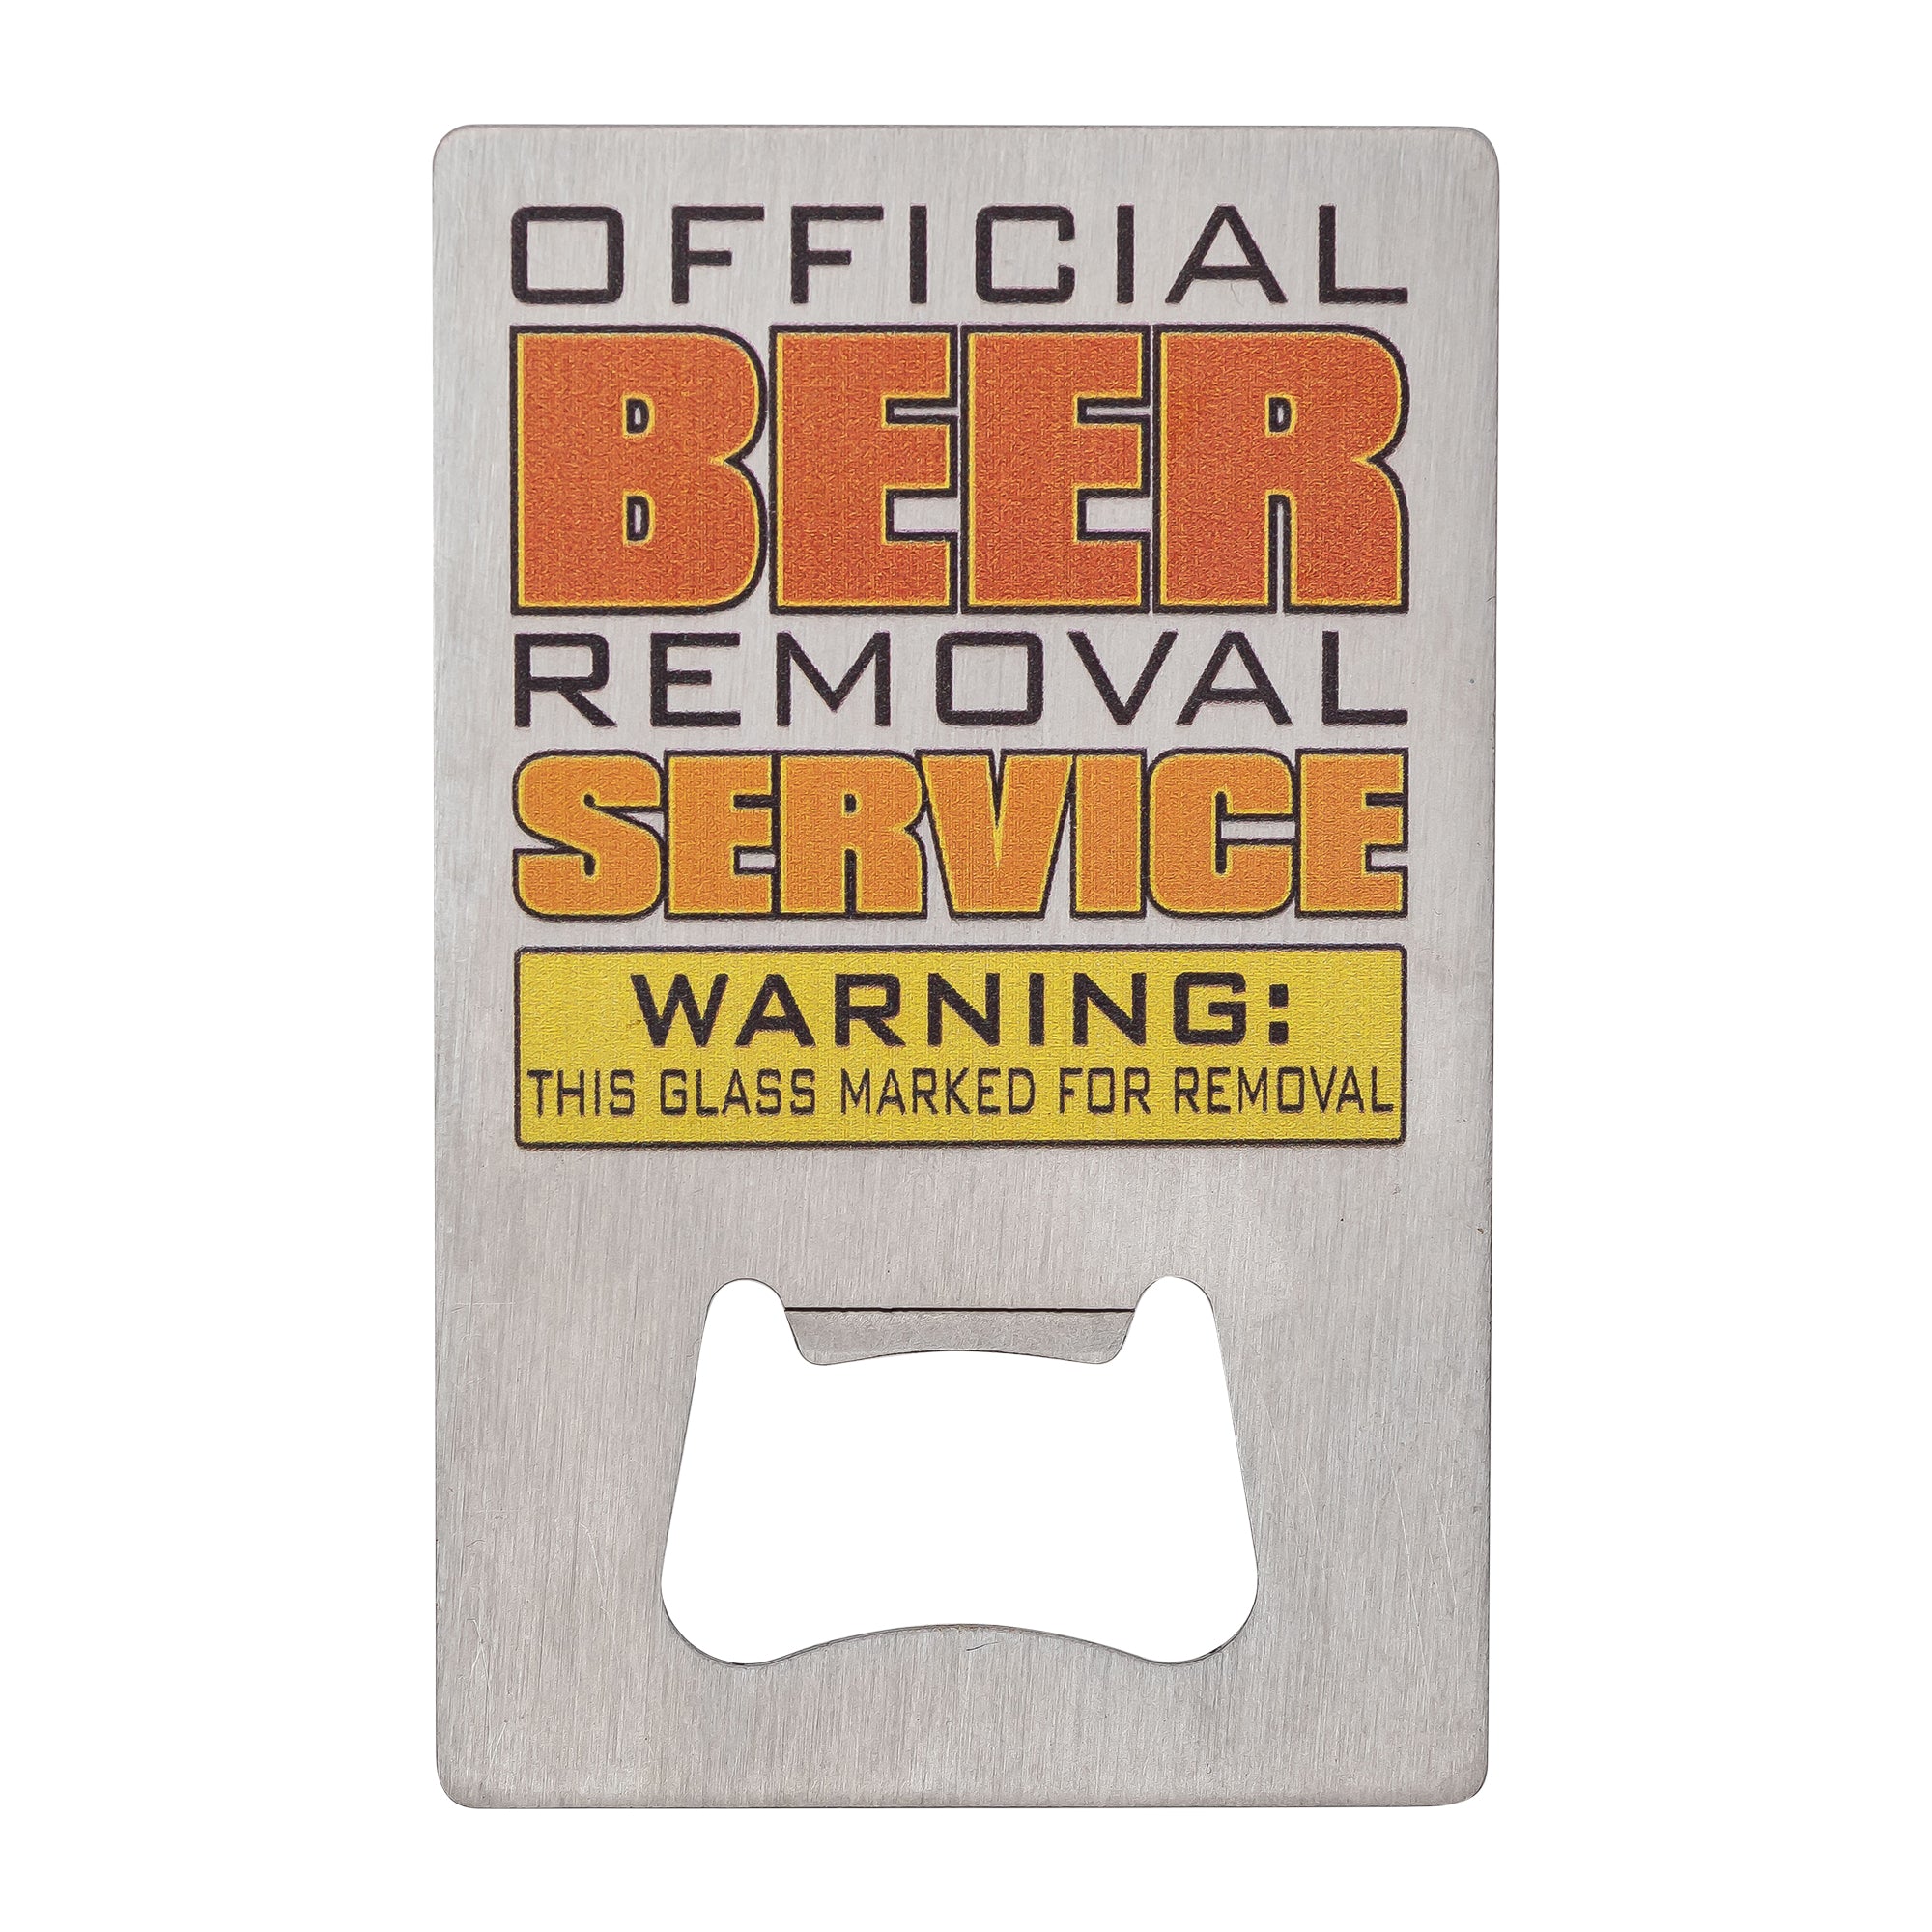 Beer Me Collection - Beer Removal